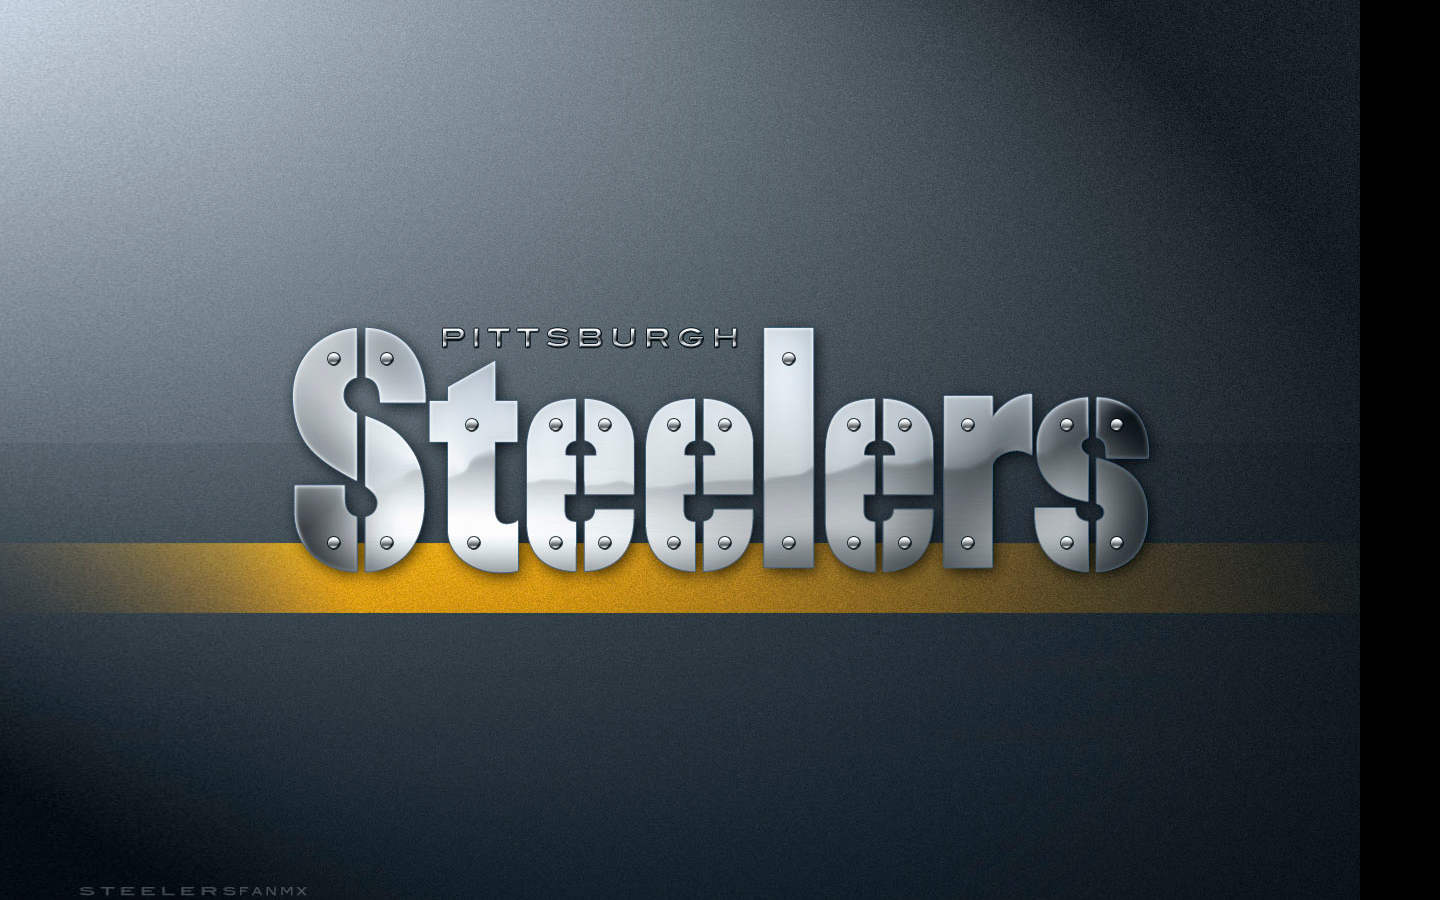 History Of All Logos: All Pittsburgh Steelers Logos 4 | Chainimage